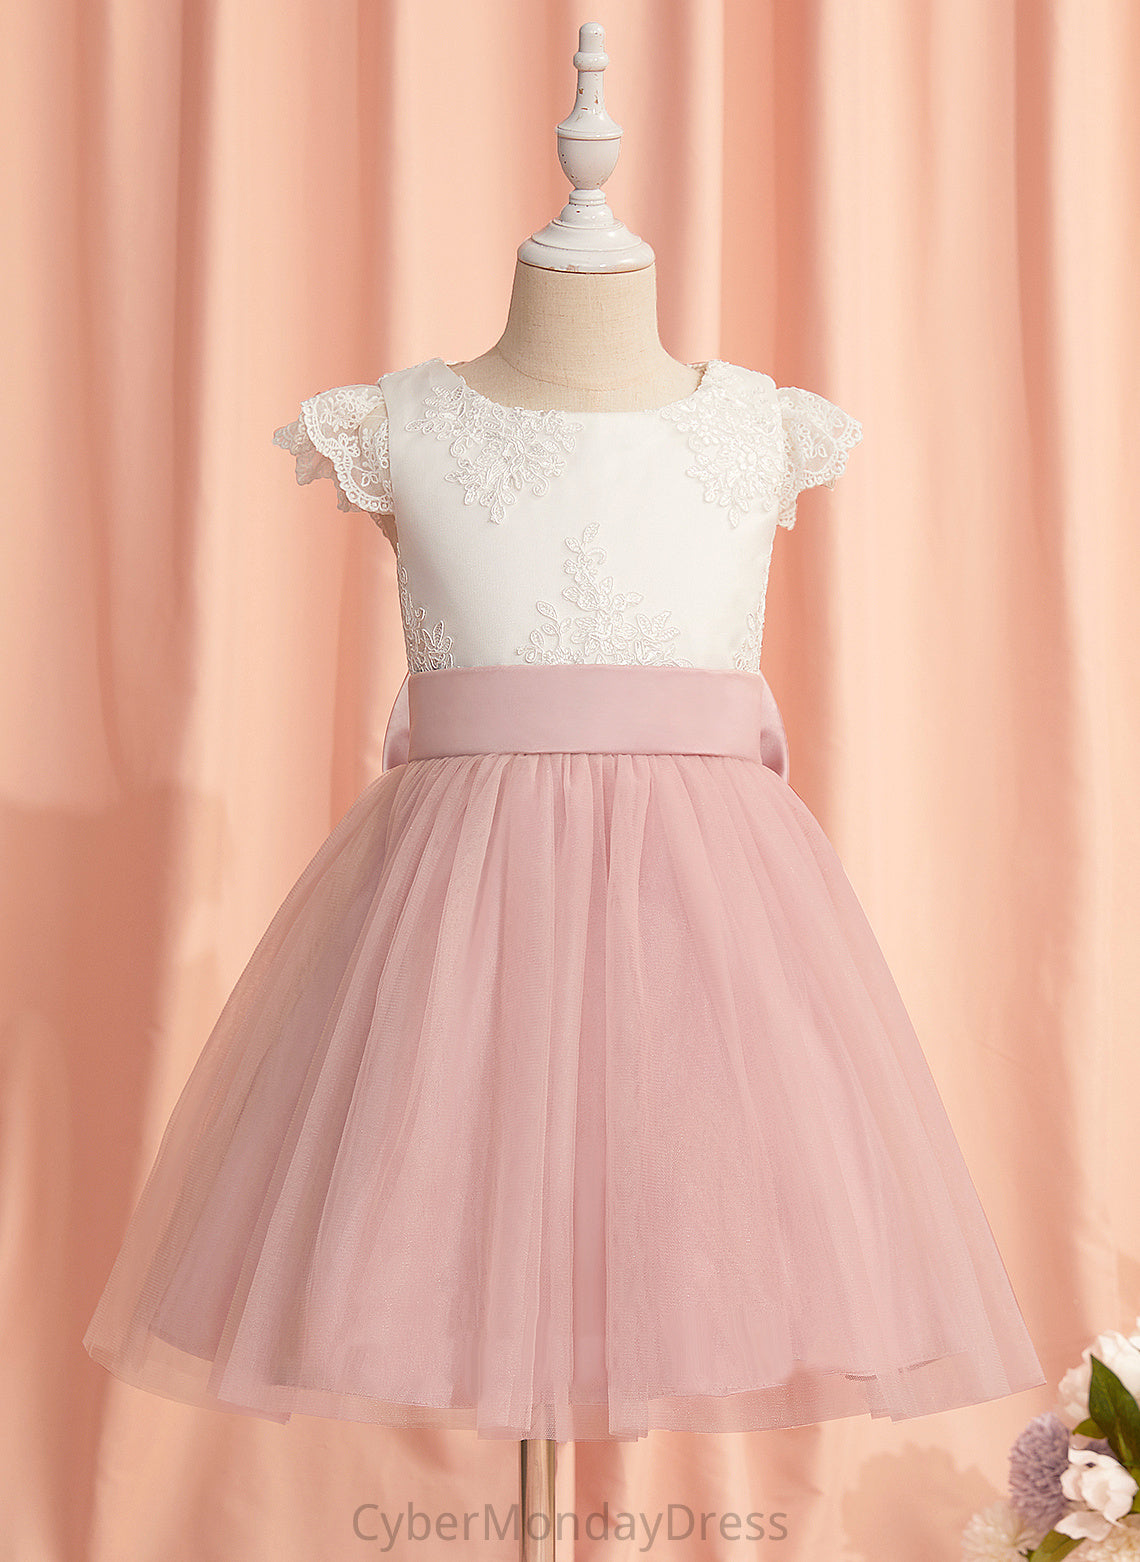 Flower With A-Line Short Lace/Bow(s) Flower Girl Dresses Monica Dress Knee-length Neck Sleeves - Girl Scoop Tulle